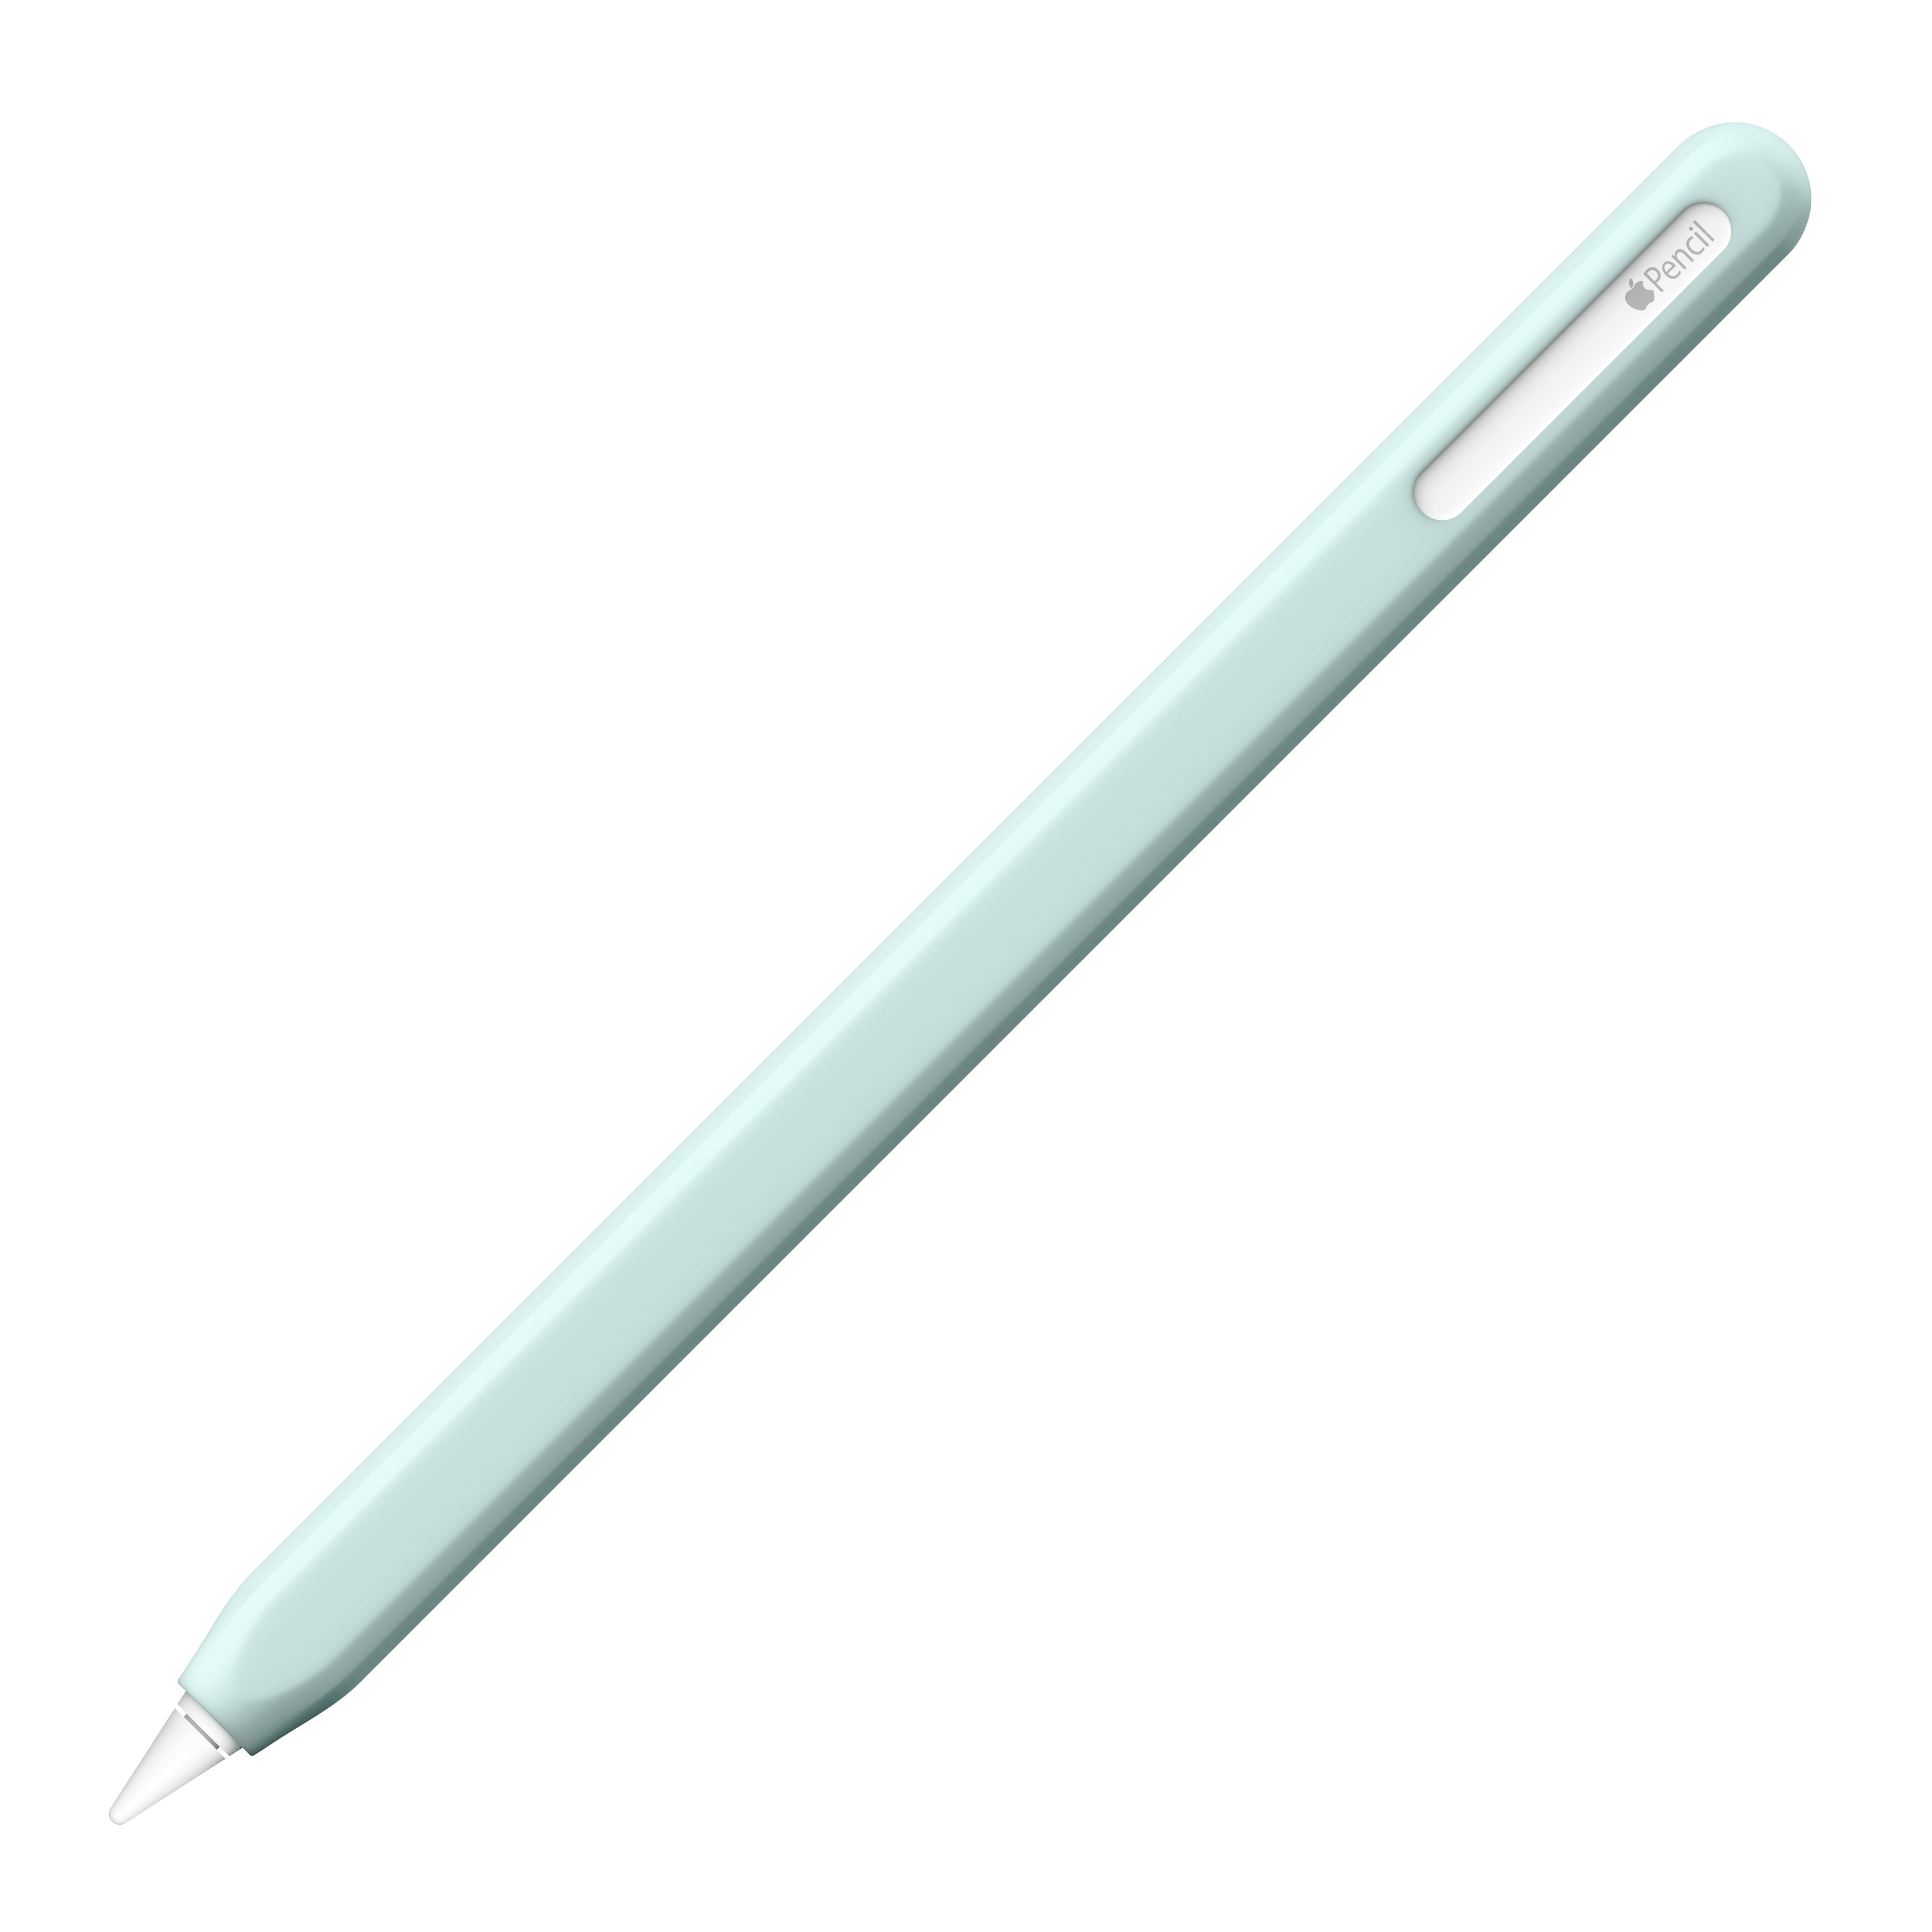 NimbleSleeve Silicone Protective Sleeve for Apple Pencil Pro/2nd Generation